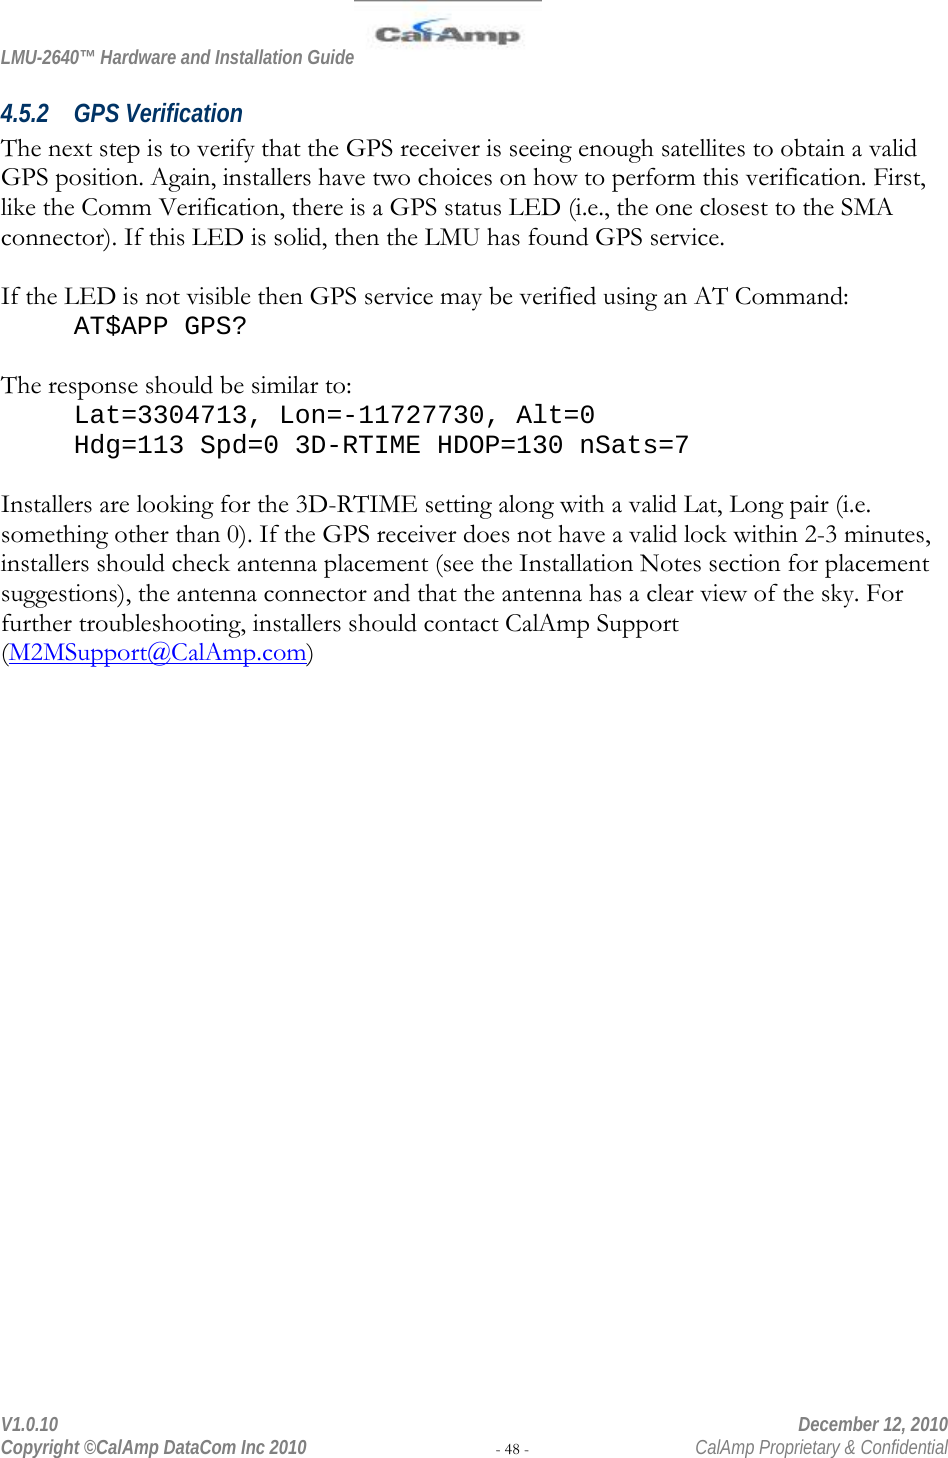 LMU-2640™ Hardware and Installation Guide  V1.0.10    December 12, 2010 Copyright ©CalAmp DataCom Inc 2010 - 48 -  CalAmp Proprietary &amp; Confidential 4.5.2 GPS Verification The next step is to verify that the GPS receiver is seeing enough satellites to obtain a valid GPS position. Again, installers have two choices on how to perform this verification. First, like the Comm Verification, there is a GPS status LED (i.e., the one closest to the SMA connector). If this LED is solid, then the LMU has found GPS service.   If the LED is not visible then GPS service may be verified using an AT Command: AT$APP GPS?  The response should be similar to: Lat=3304713, Lon=-11727730, Alt=0 Hdg=113 Spd=0 3D-RTIME HDOP=130 nSats=7  Installers are looking for the 3D-RTIME setting along with a valid Lat, Long pair (i.e. something other than 0). If the GPS receiver does not have a valid lock within 2-3 minutes, installers should check antenna placement (see the Installation Notes section for placement suggestions), the antenna connector and that the antenna has a clear view of the sky. For further troubleshooting, installers should contact CalAmp Support (M2MSupport@CalAmp.com) 